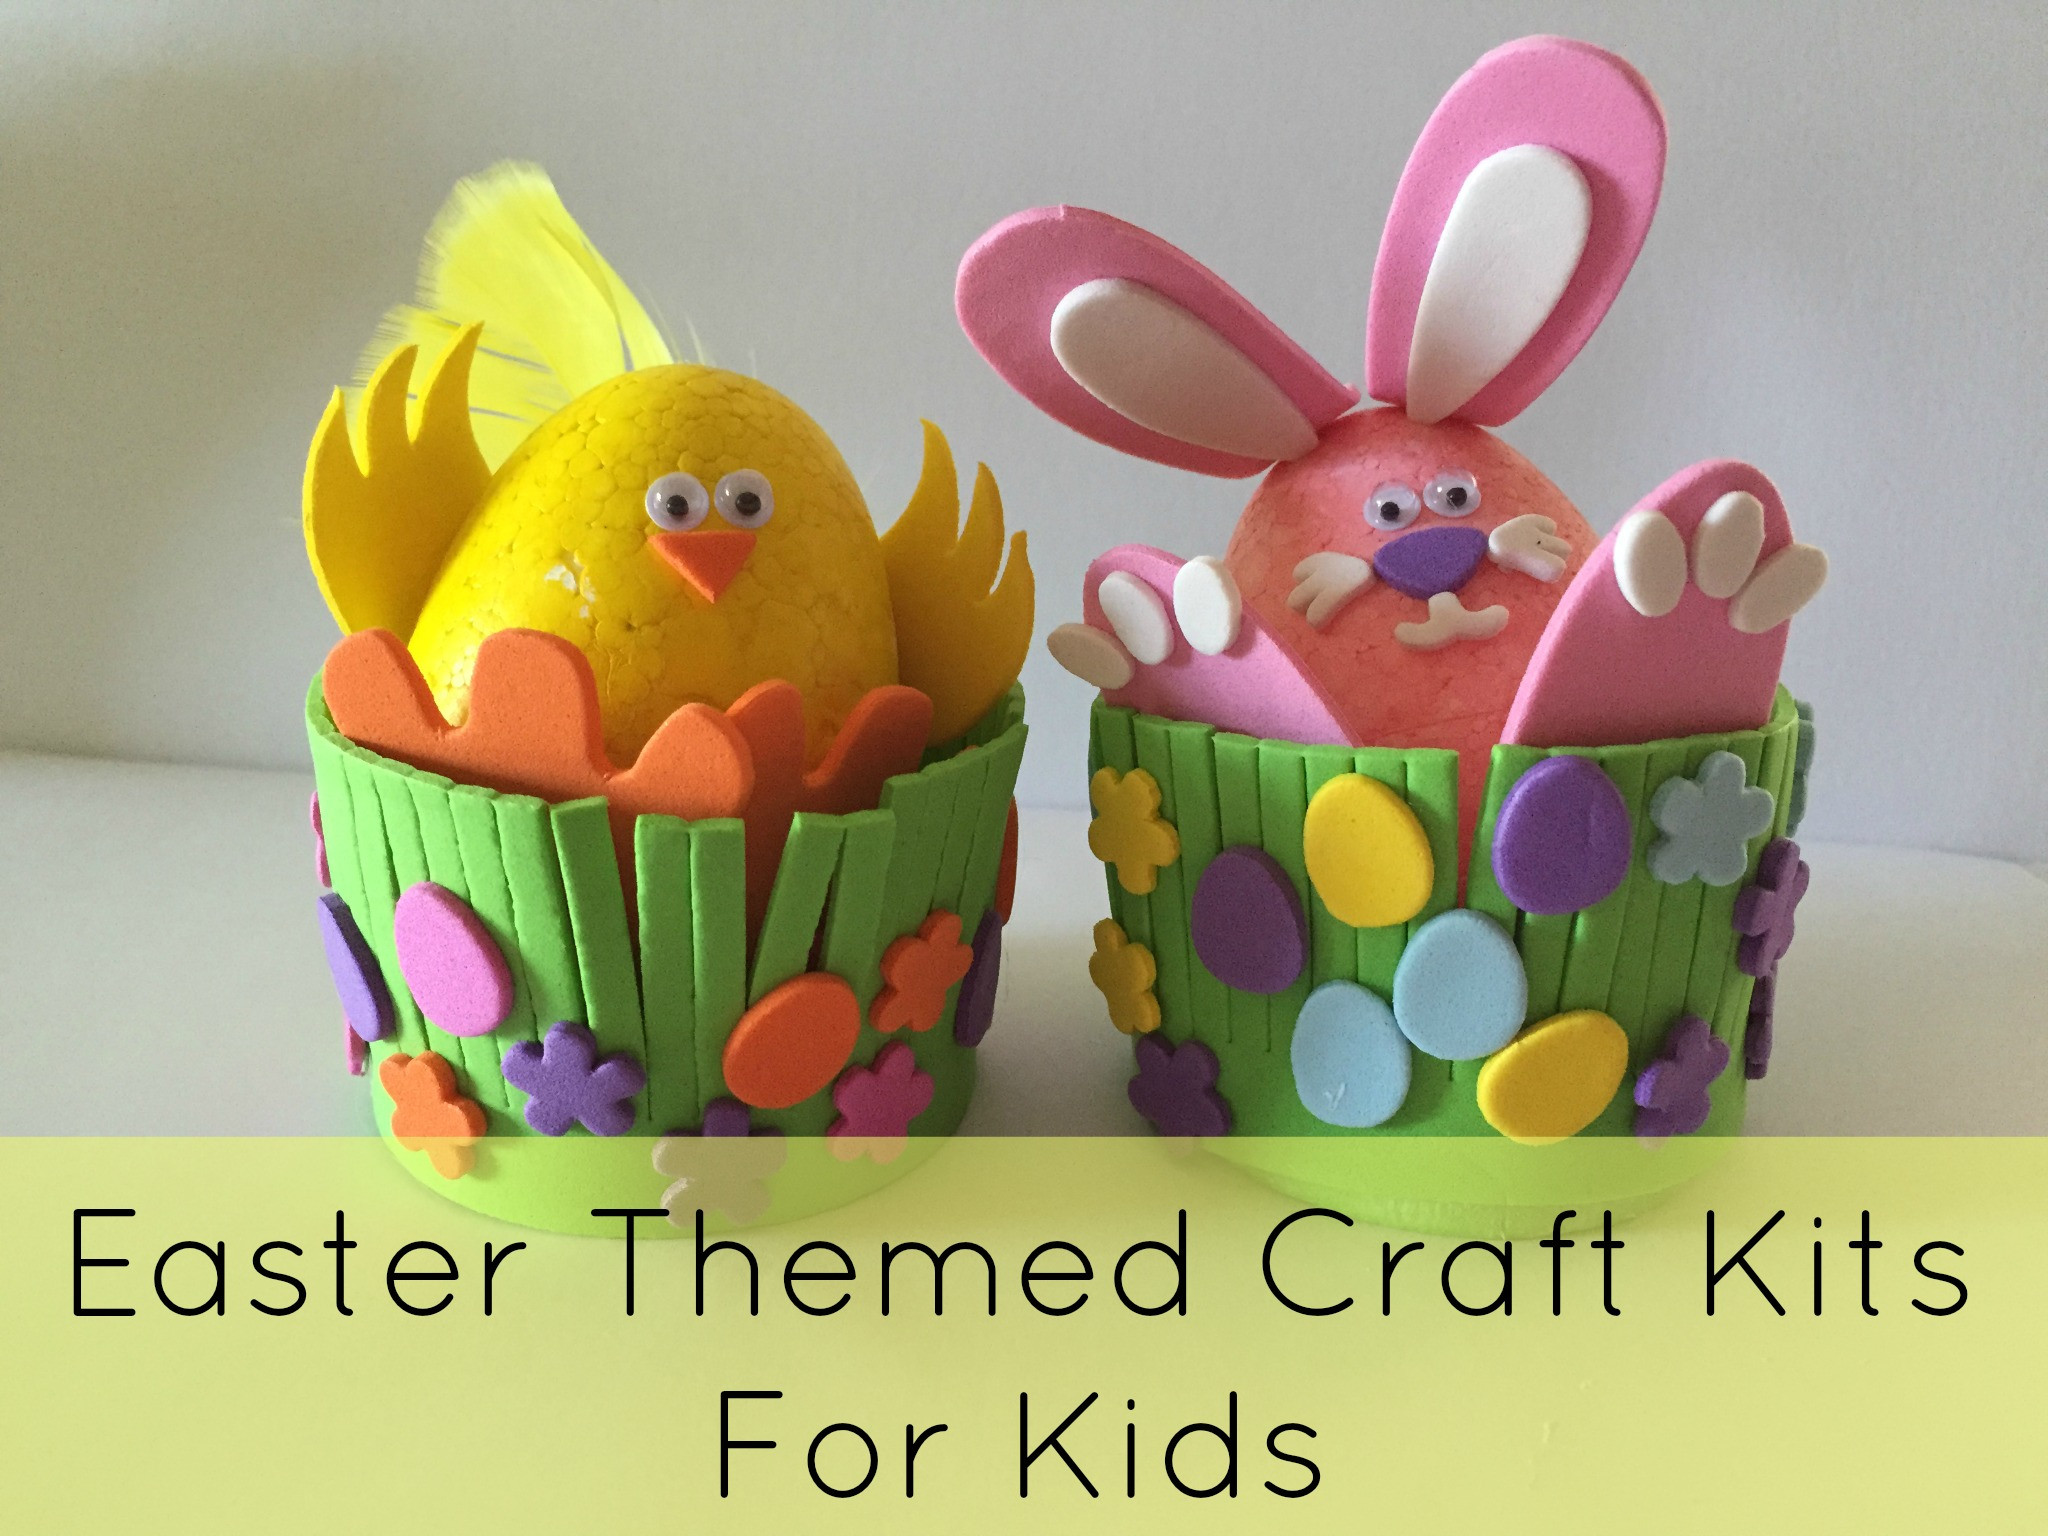 Craft Kits For Kids
 CleverPatch Easter Themed Craft Kits for Kids And Sew We